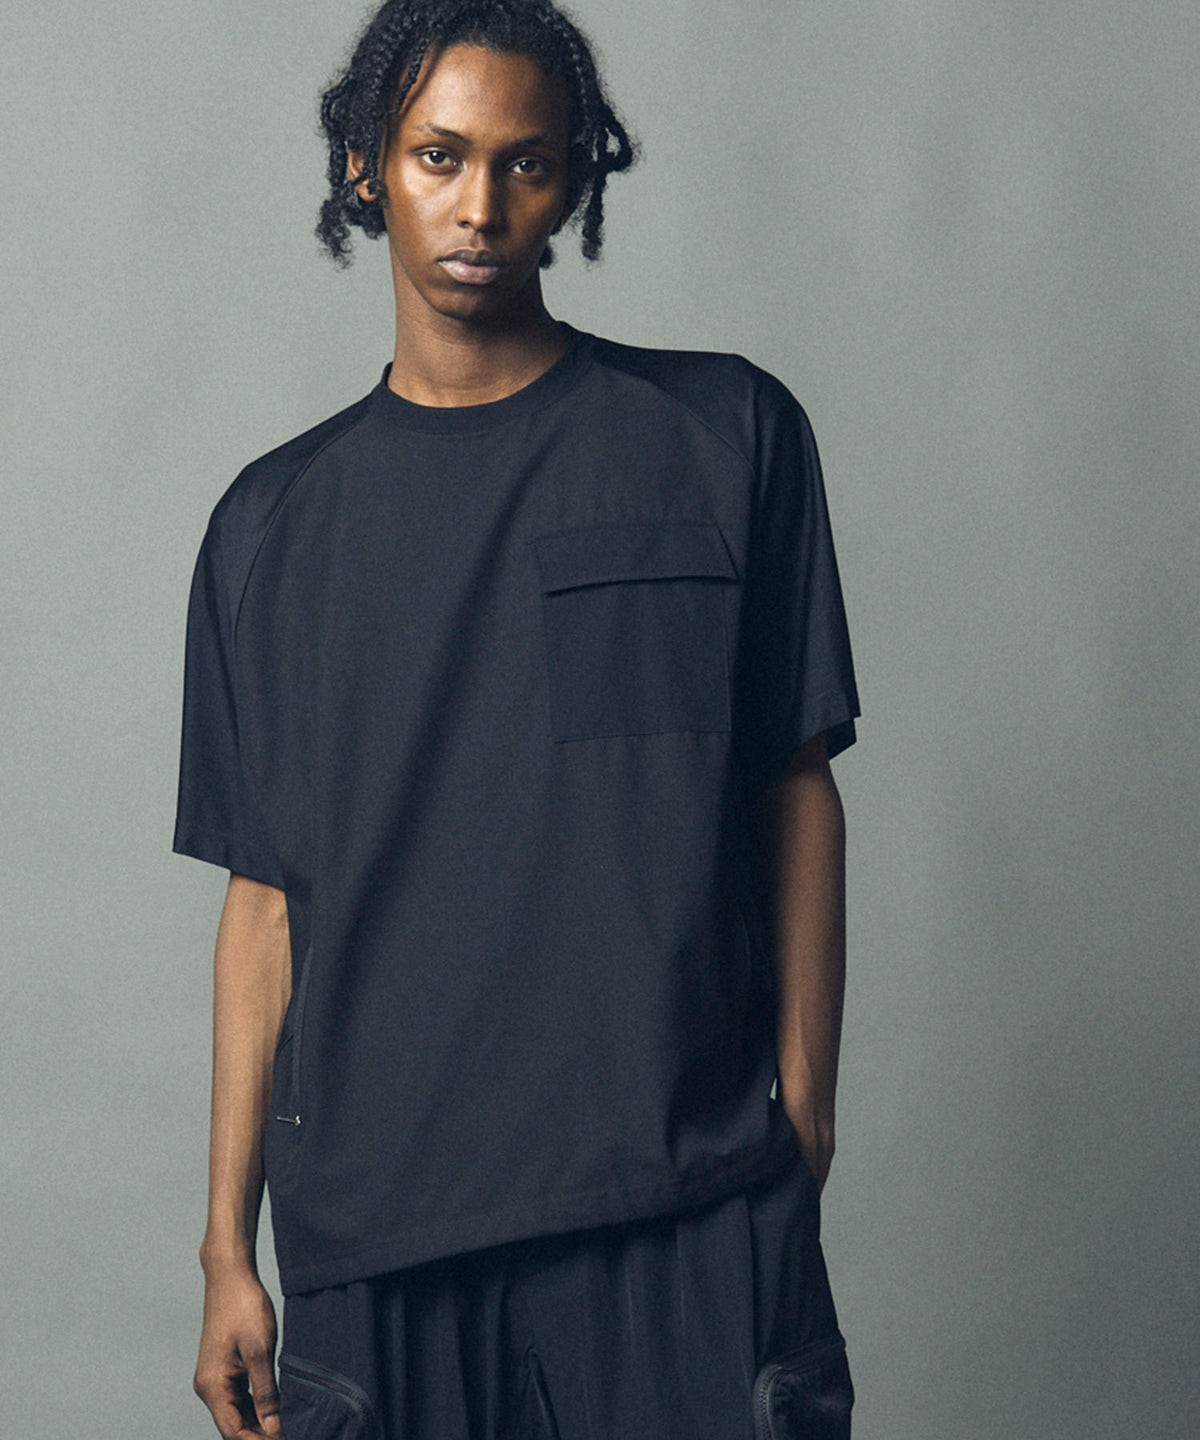 【SPORTS TECH HIGH SPEC LINE】Oversized Different Material Combination Side Zip Crew Neck T-shirt